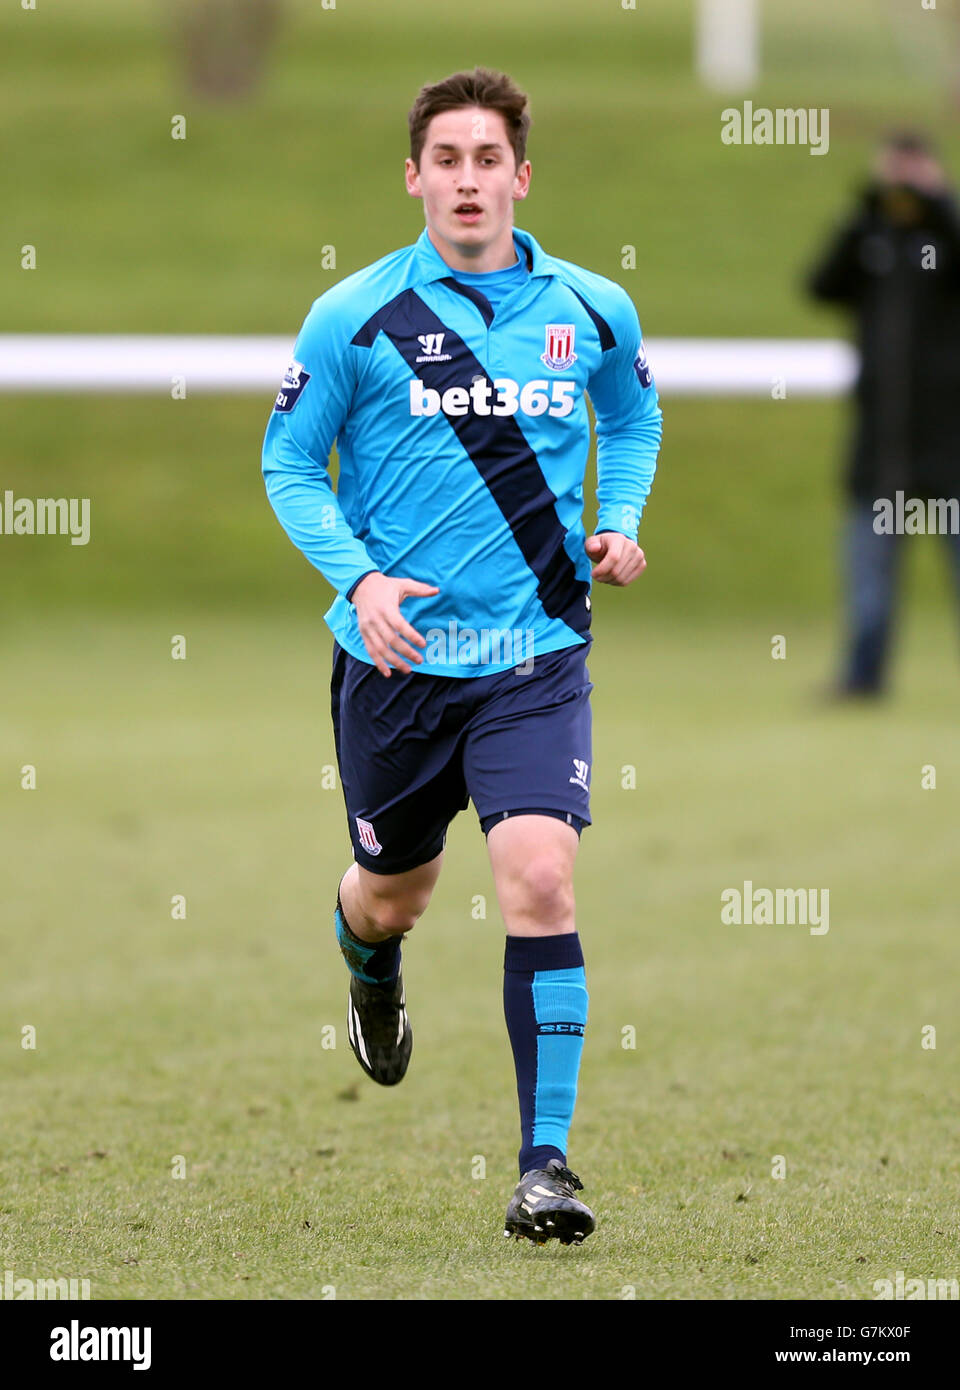 Soccer - Barclays Under 21 Premier League - Derby County v Stoke City - Derby County Training Academy. Toby Wells, Stoke City Under 21's Stock Photo